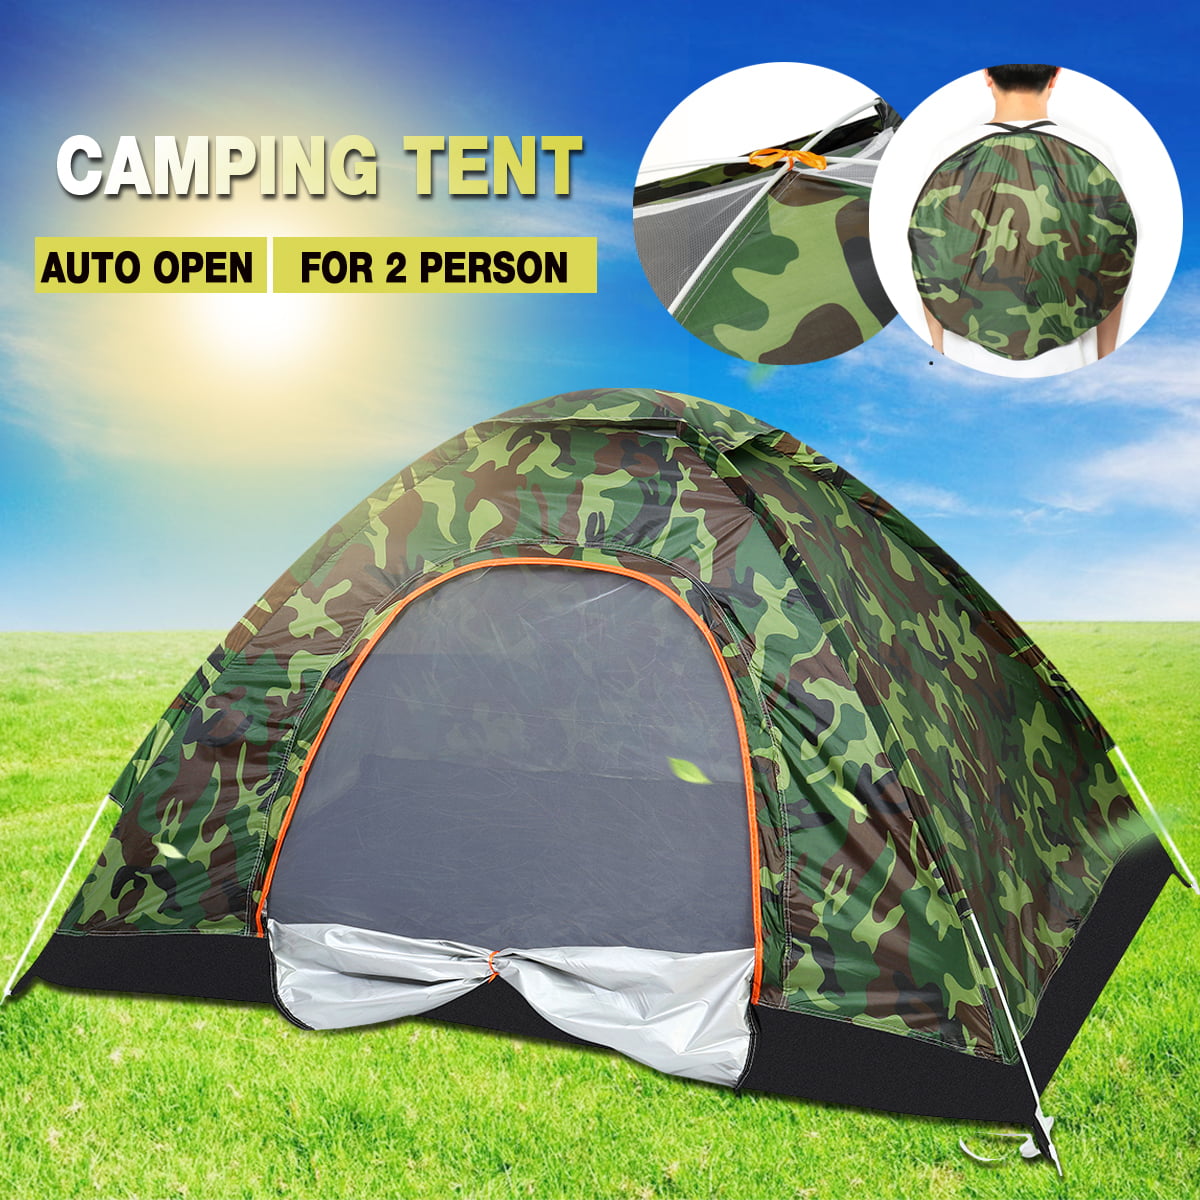 1-2 Person Family Tent Camping Backpacking Hiking Traveling Fishing Shelter Camo 